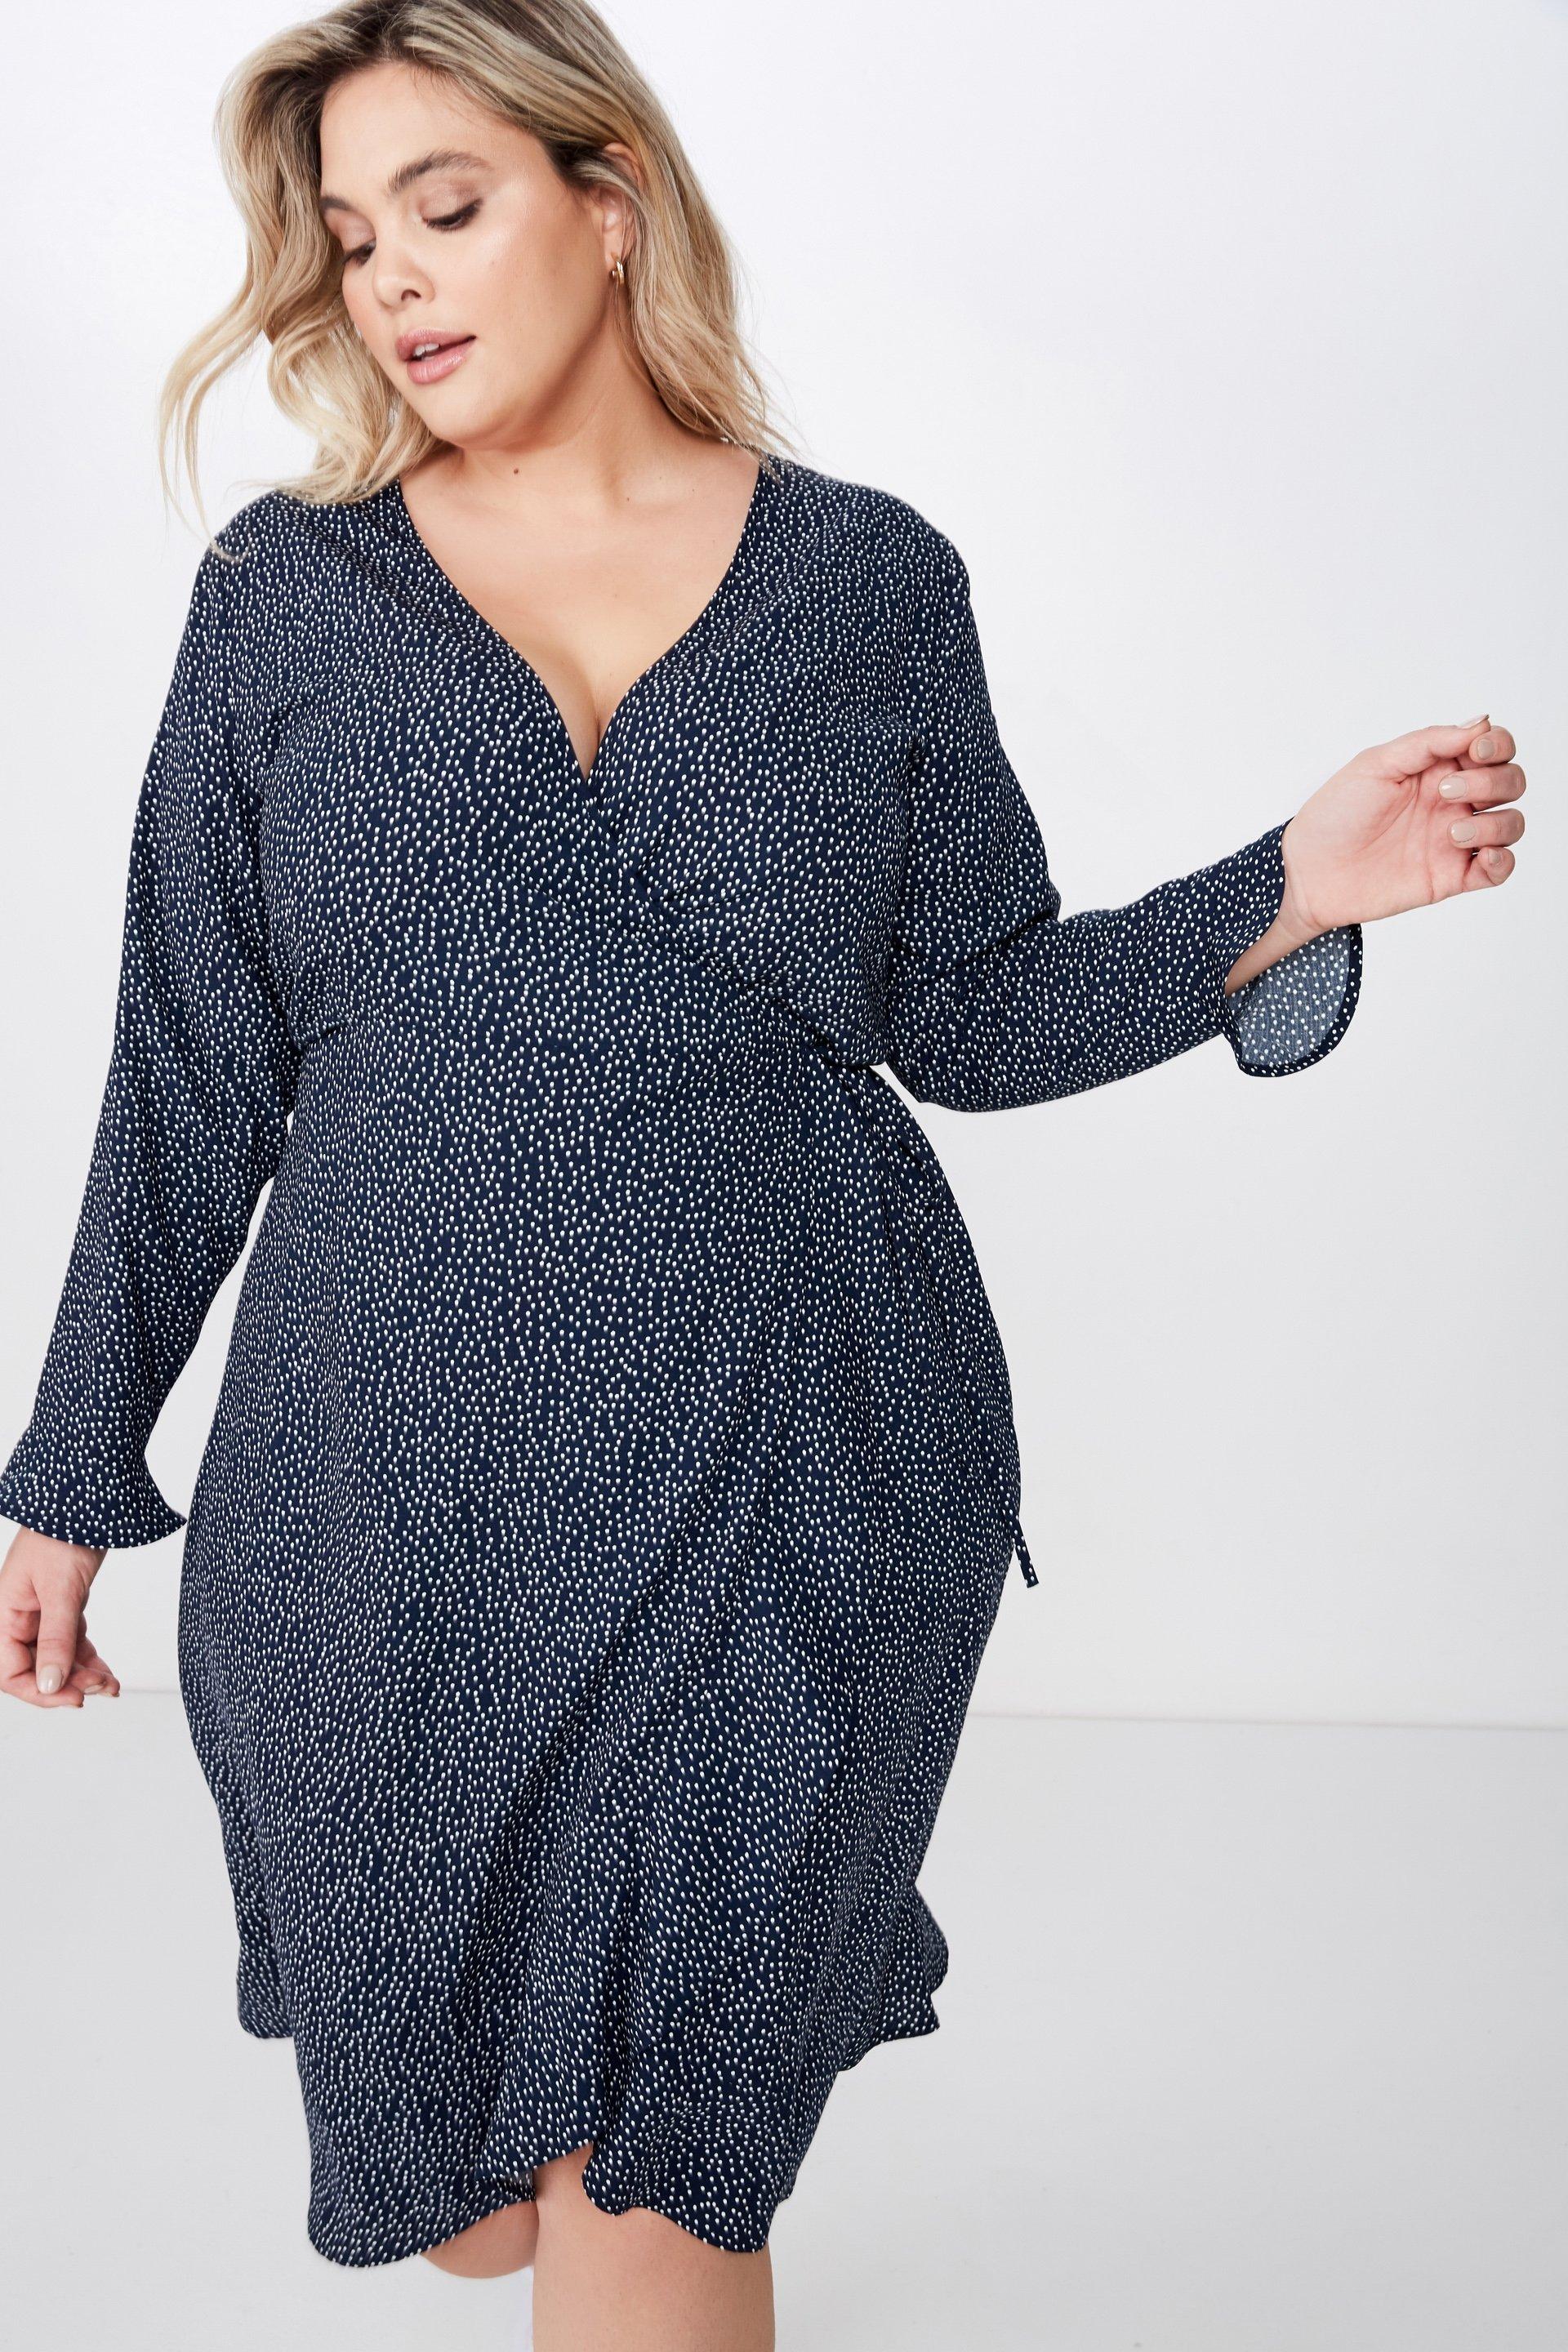 Curve woven willow wrap - navy Cotton On Dresses | Superbalist.com